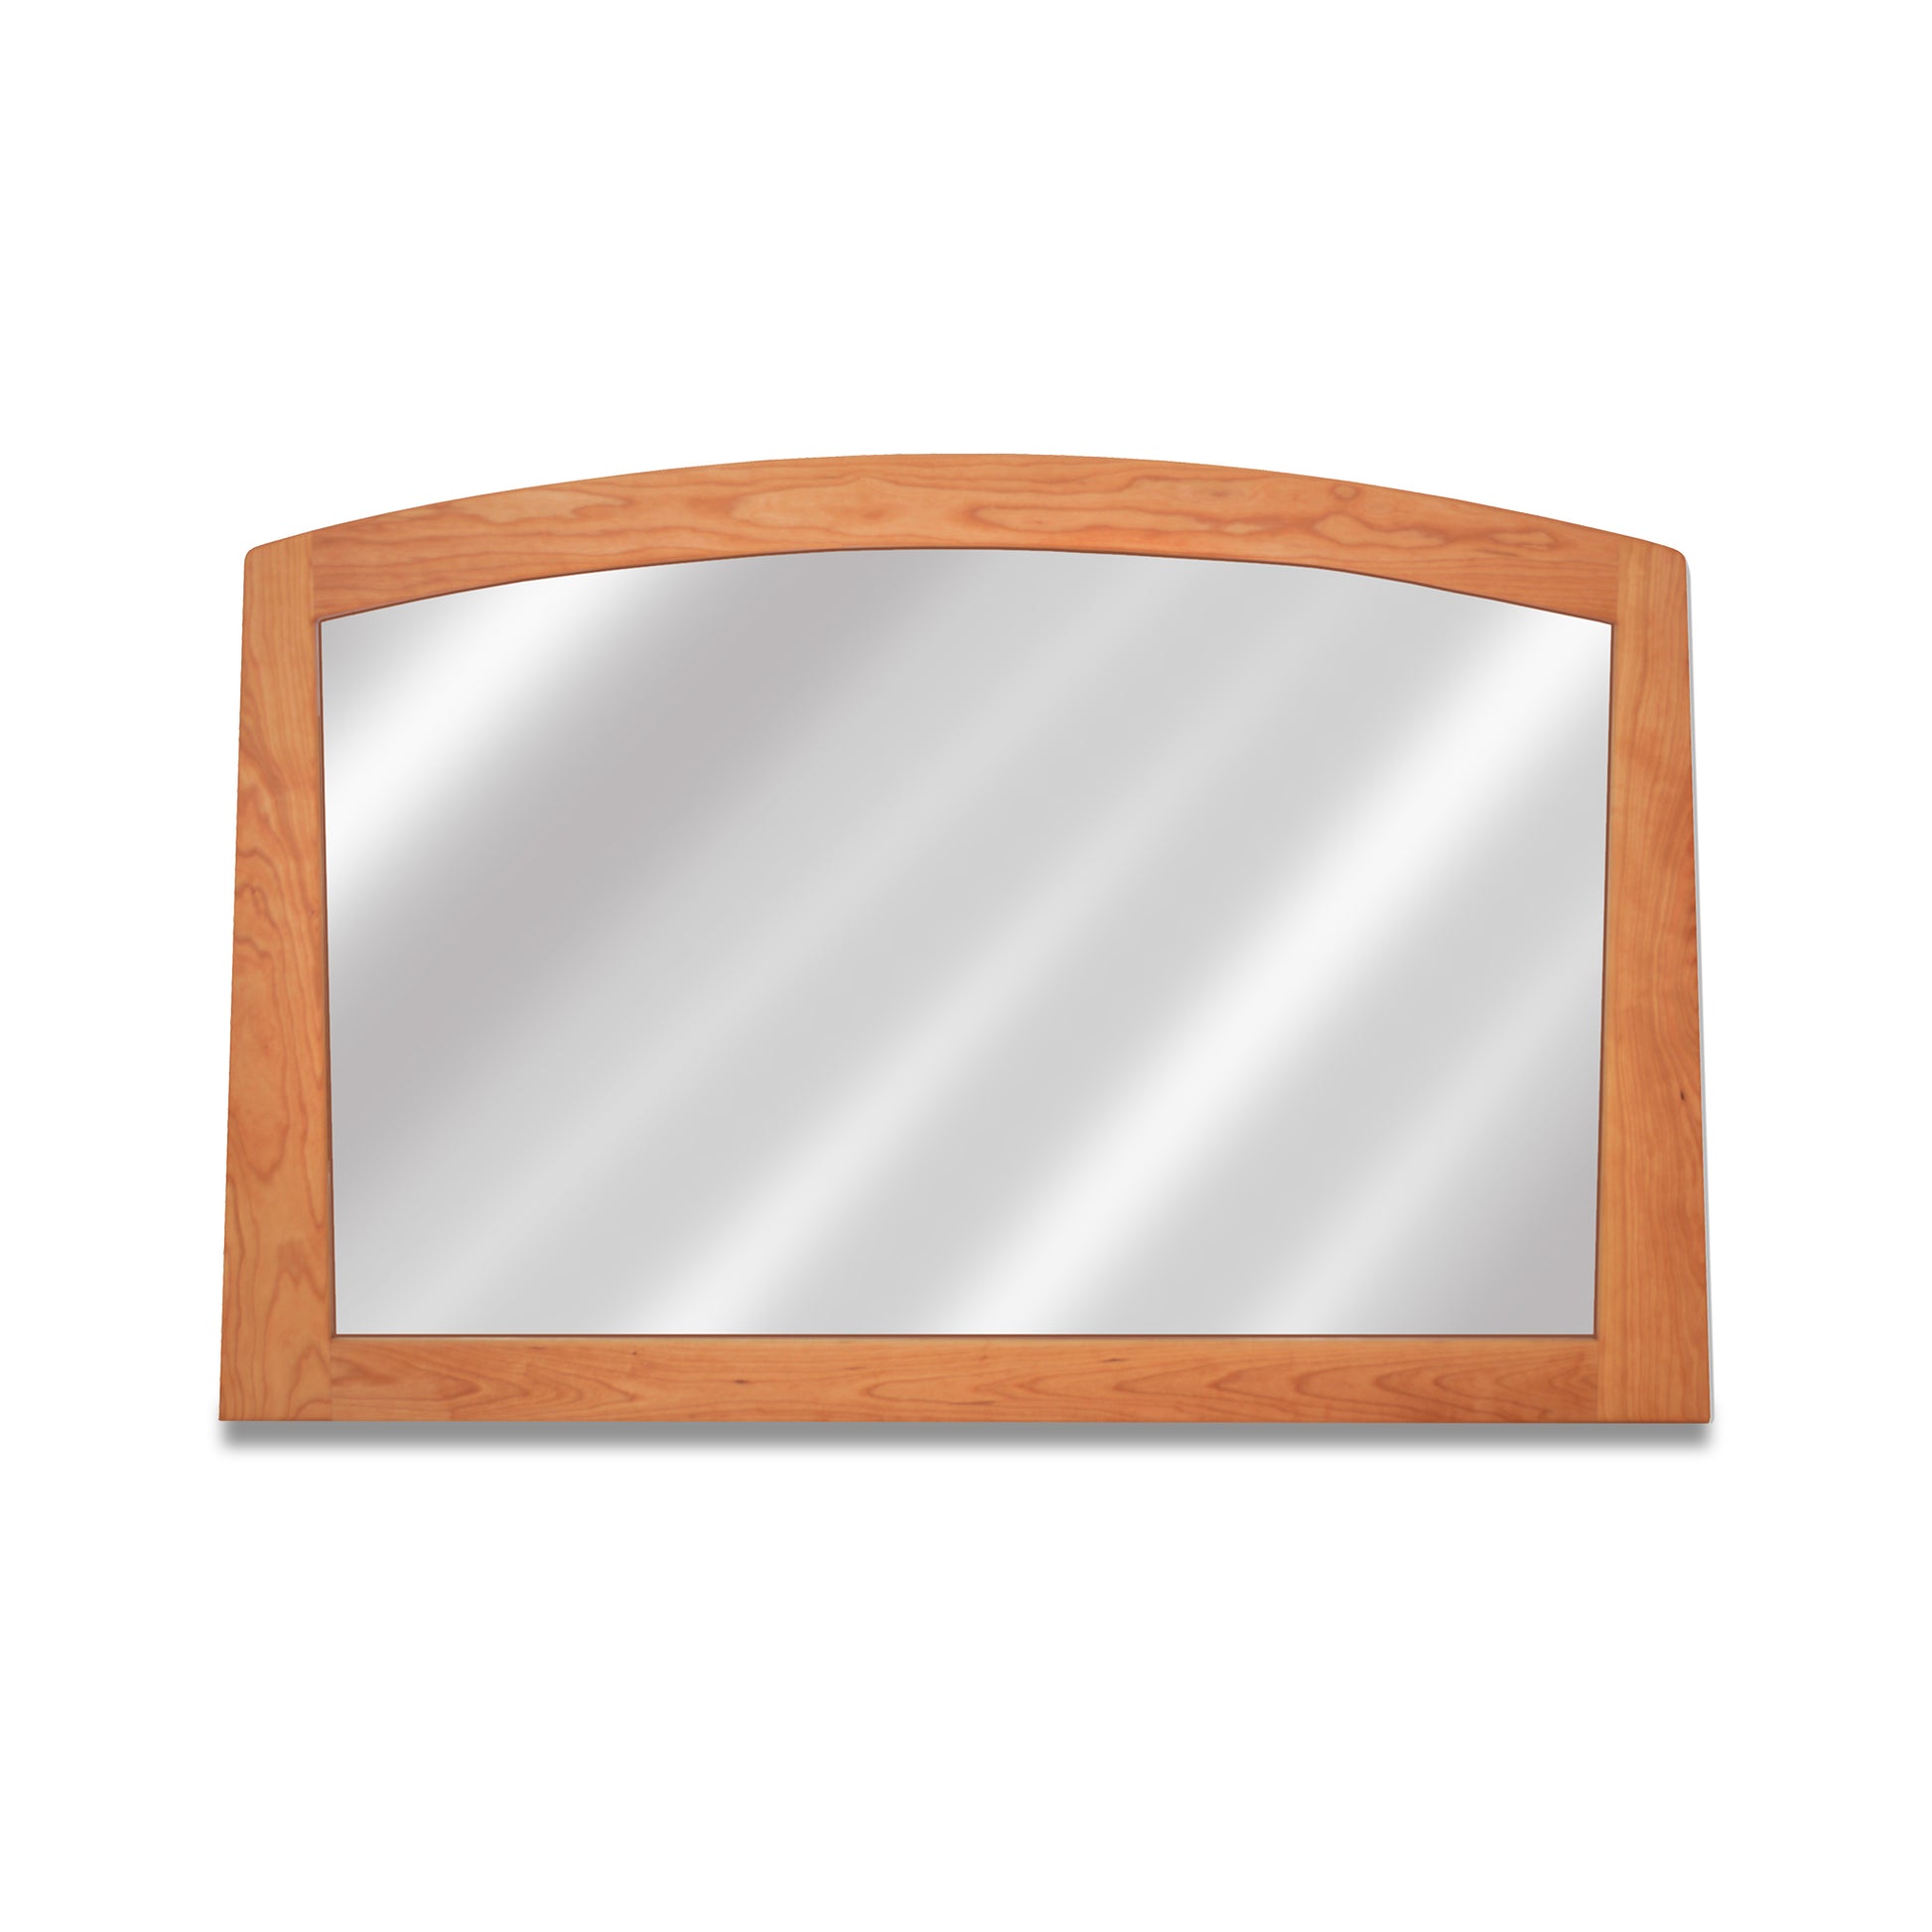 A handcrafted Cherry Moon Horizontal Mirror with a Maple Corner Woodworks hardwood frame on a white background.